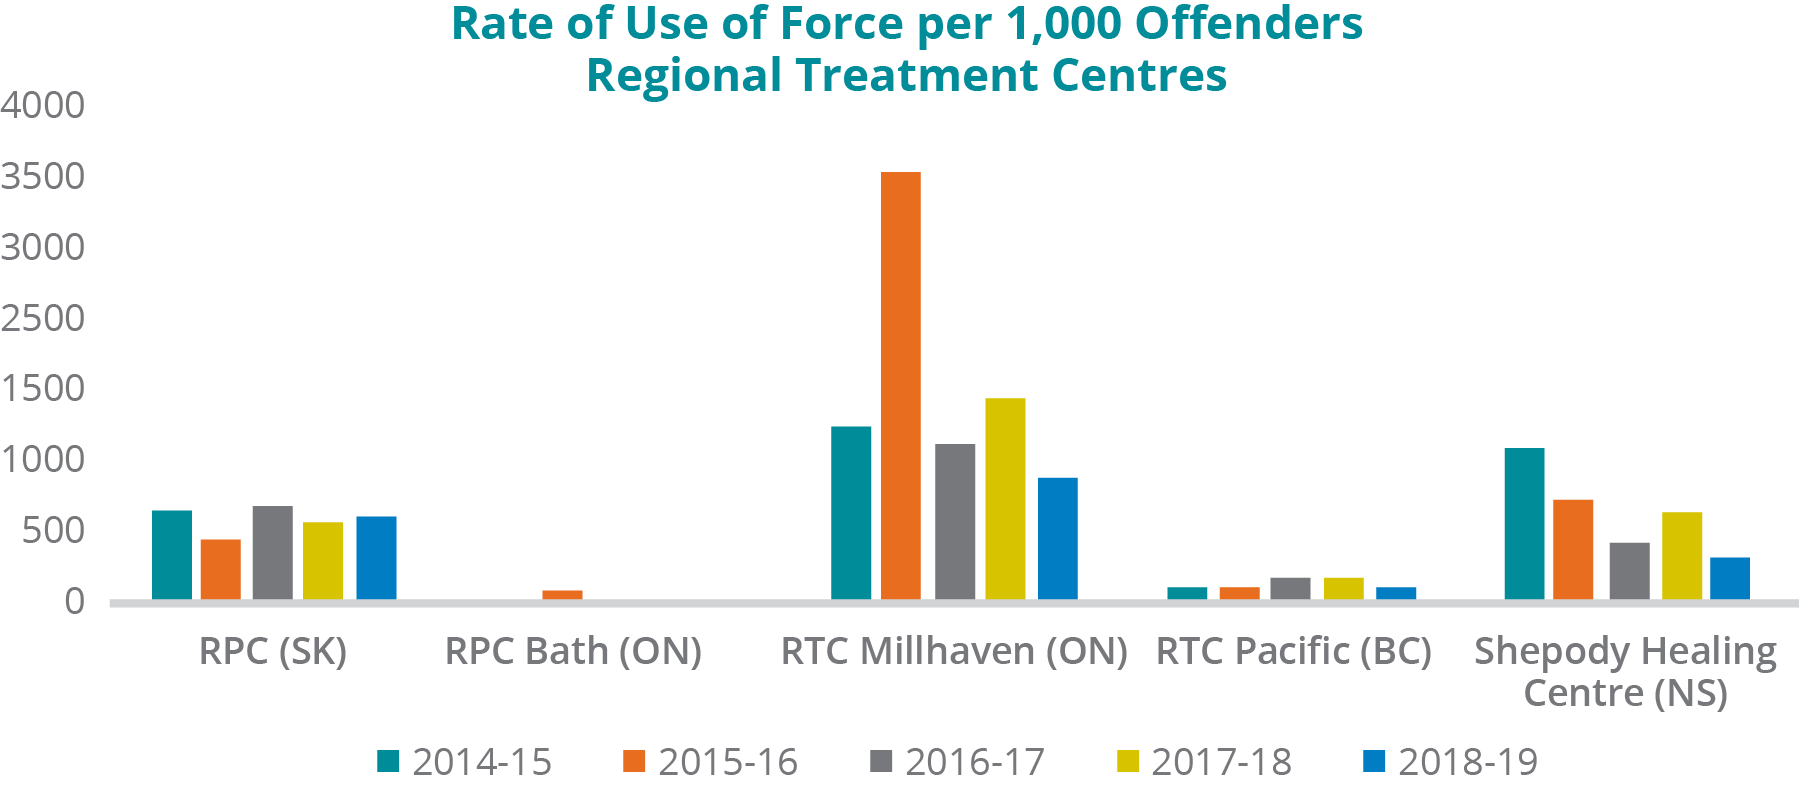 A graph depicting the rate of use of force per 1,000 offenders in Regional Treatment Centres: Regional Psychiatric Centre â€“ Saskatoon: In 2014-15, there were 765 use of force incidents per 1,000 offenders; in 2015-16, 534 per 1,000 offenders; in 2016-17, 810 per 1,000 offenders; in 2017-18, 682 per 1,000 offenders; in 2018-19, 734 per 1,000 offenders.-	Regional Treatment Centre â€“ Bath: In 2014-15, there were 0 use of force incidents per 1,000 offenders; in 2015-16, 80 per 1,000 offenders; in 2016-17, 29 per 1,000 offenders; in 2017-18, 0 per 1,000 offenders; in 2018-19, 29 per 1,000 offenders.-	Regional Treatment Centre â€“ Millhaven: In 2014-15, there were 1,435 use of force incidents per 1,000 offenders; in 2015-16, 3,500 per 1,000 offenders; in 2016-17, 1,296 per 1,000 offenders; in 2017-18, 1,667 per 1,000 offenders; in 2018-19, 1011 per 1,000 offenders.-	Regional Treatment Centre â€“ Pacific: In 2014-15, there were 106 use of force incidents per 1,000 offenders; in 2015-16, 101 per 1,000 offenders; in 2016-17, 156 per 1,000 offenders; in 2017-18, 170 per 1,000 offenders; in 2018-19, 92 per 1,000 offenders.-	Shepody Healing Centre â€“ Nova Scotia: In 2014-15, there were 1,235 use of force incidents per 1,000 offenders; in 2015-16, 833 per 1,000 offenders; in 2016-17, 444 per 1,000 offenders; in 2017-18, 694 per 1,000 offenders; in 2018-19, 350 per 1,000 offenders.